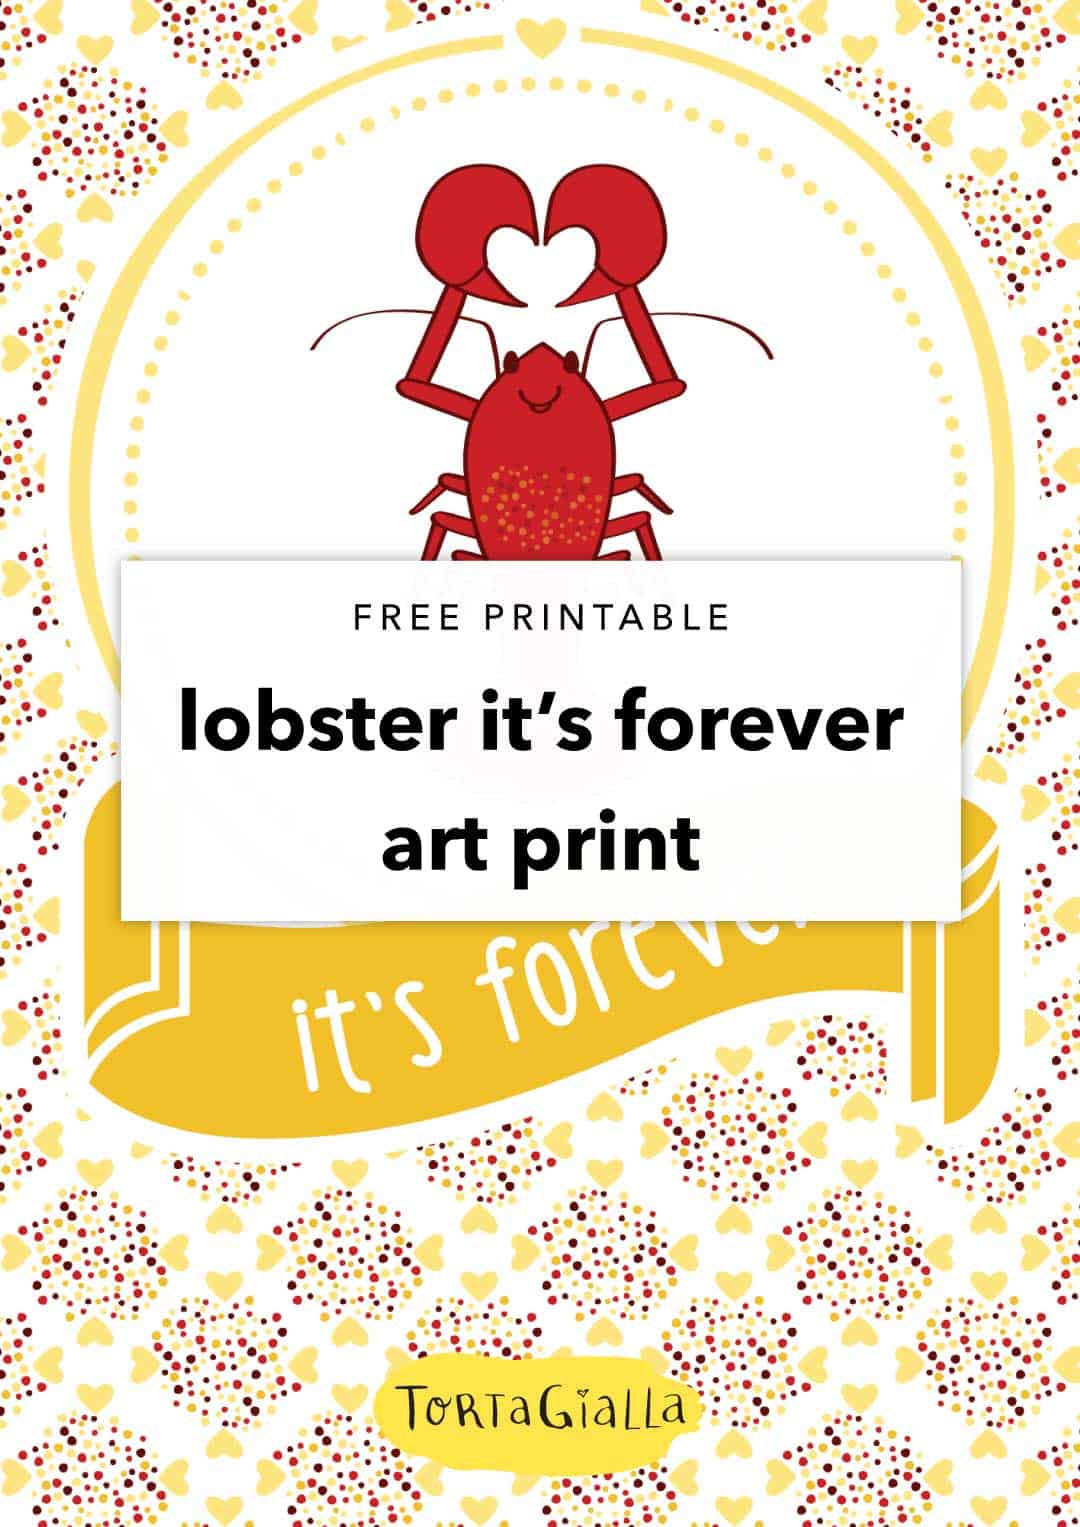 Free lobster art printable - it's forever love art print with lobster.